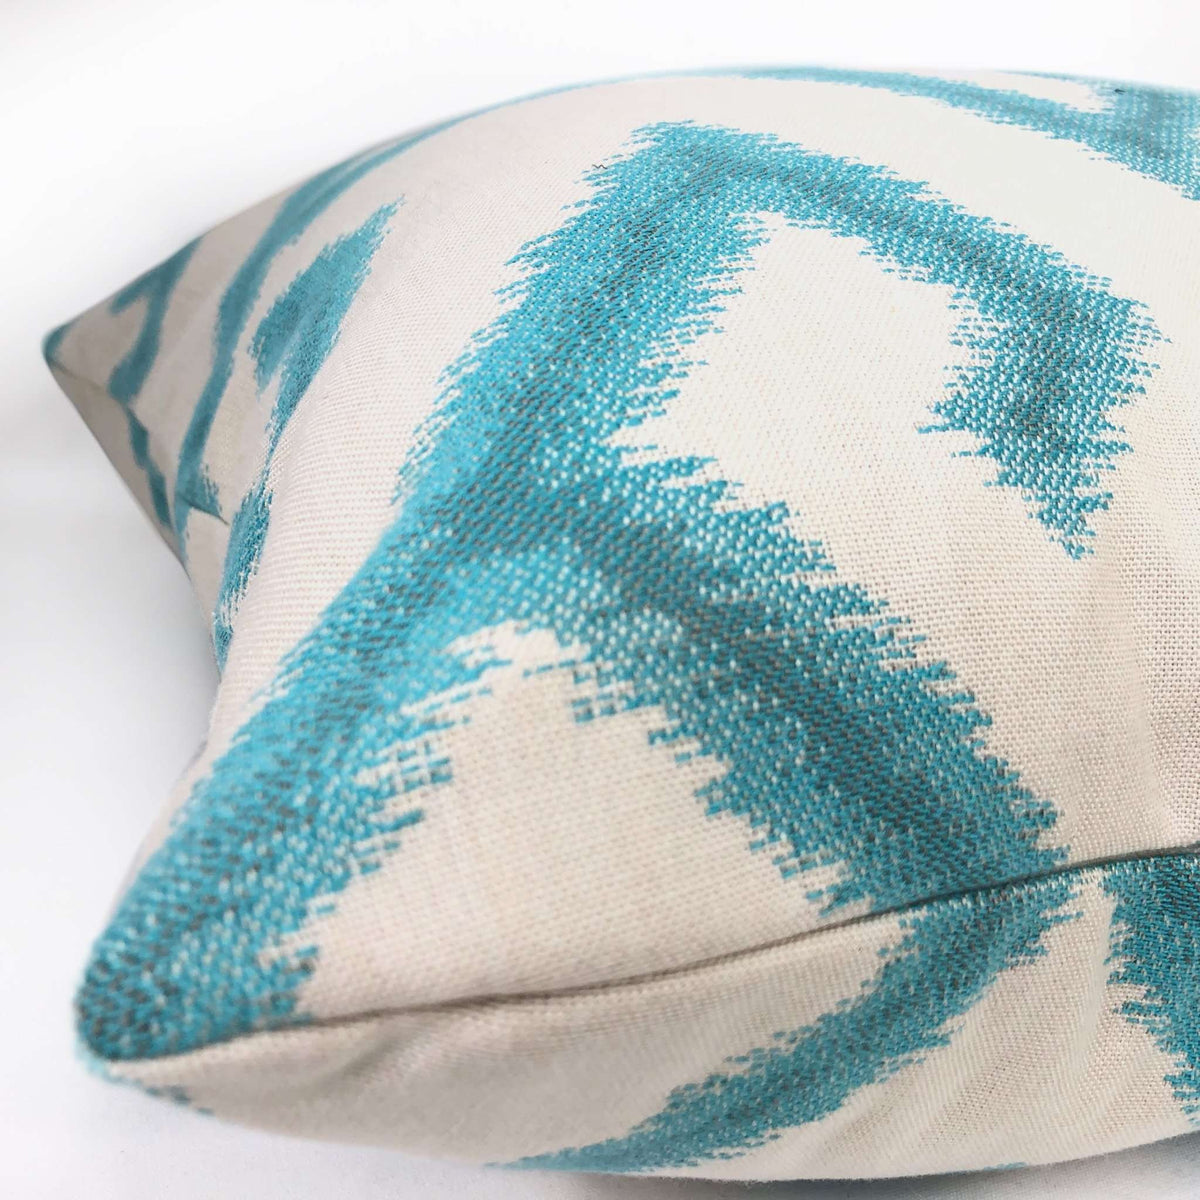 outdoor turquoise pillows